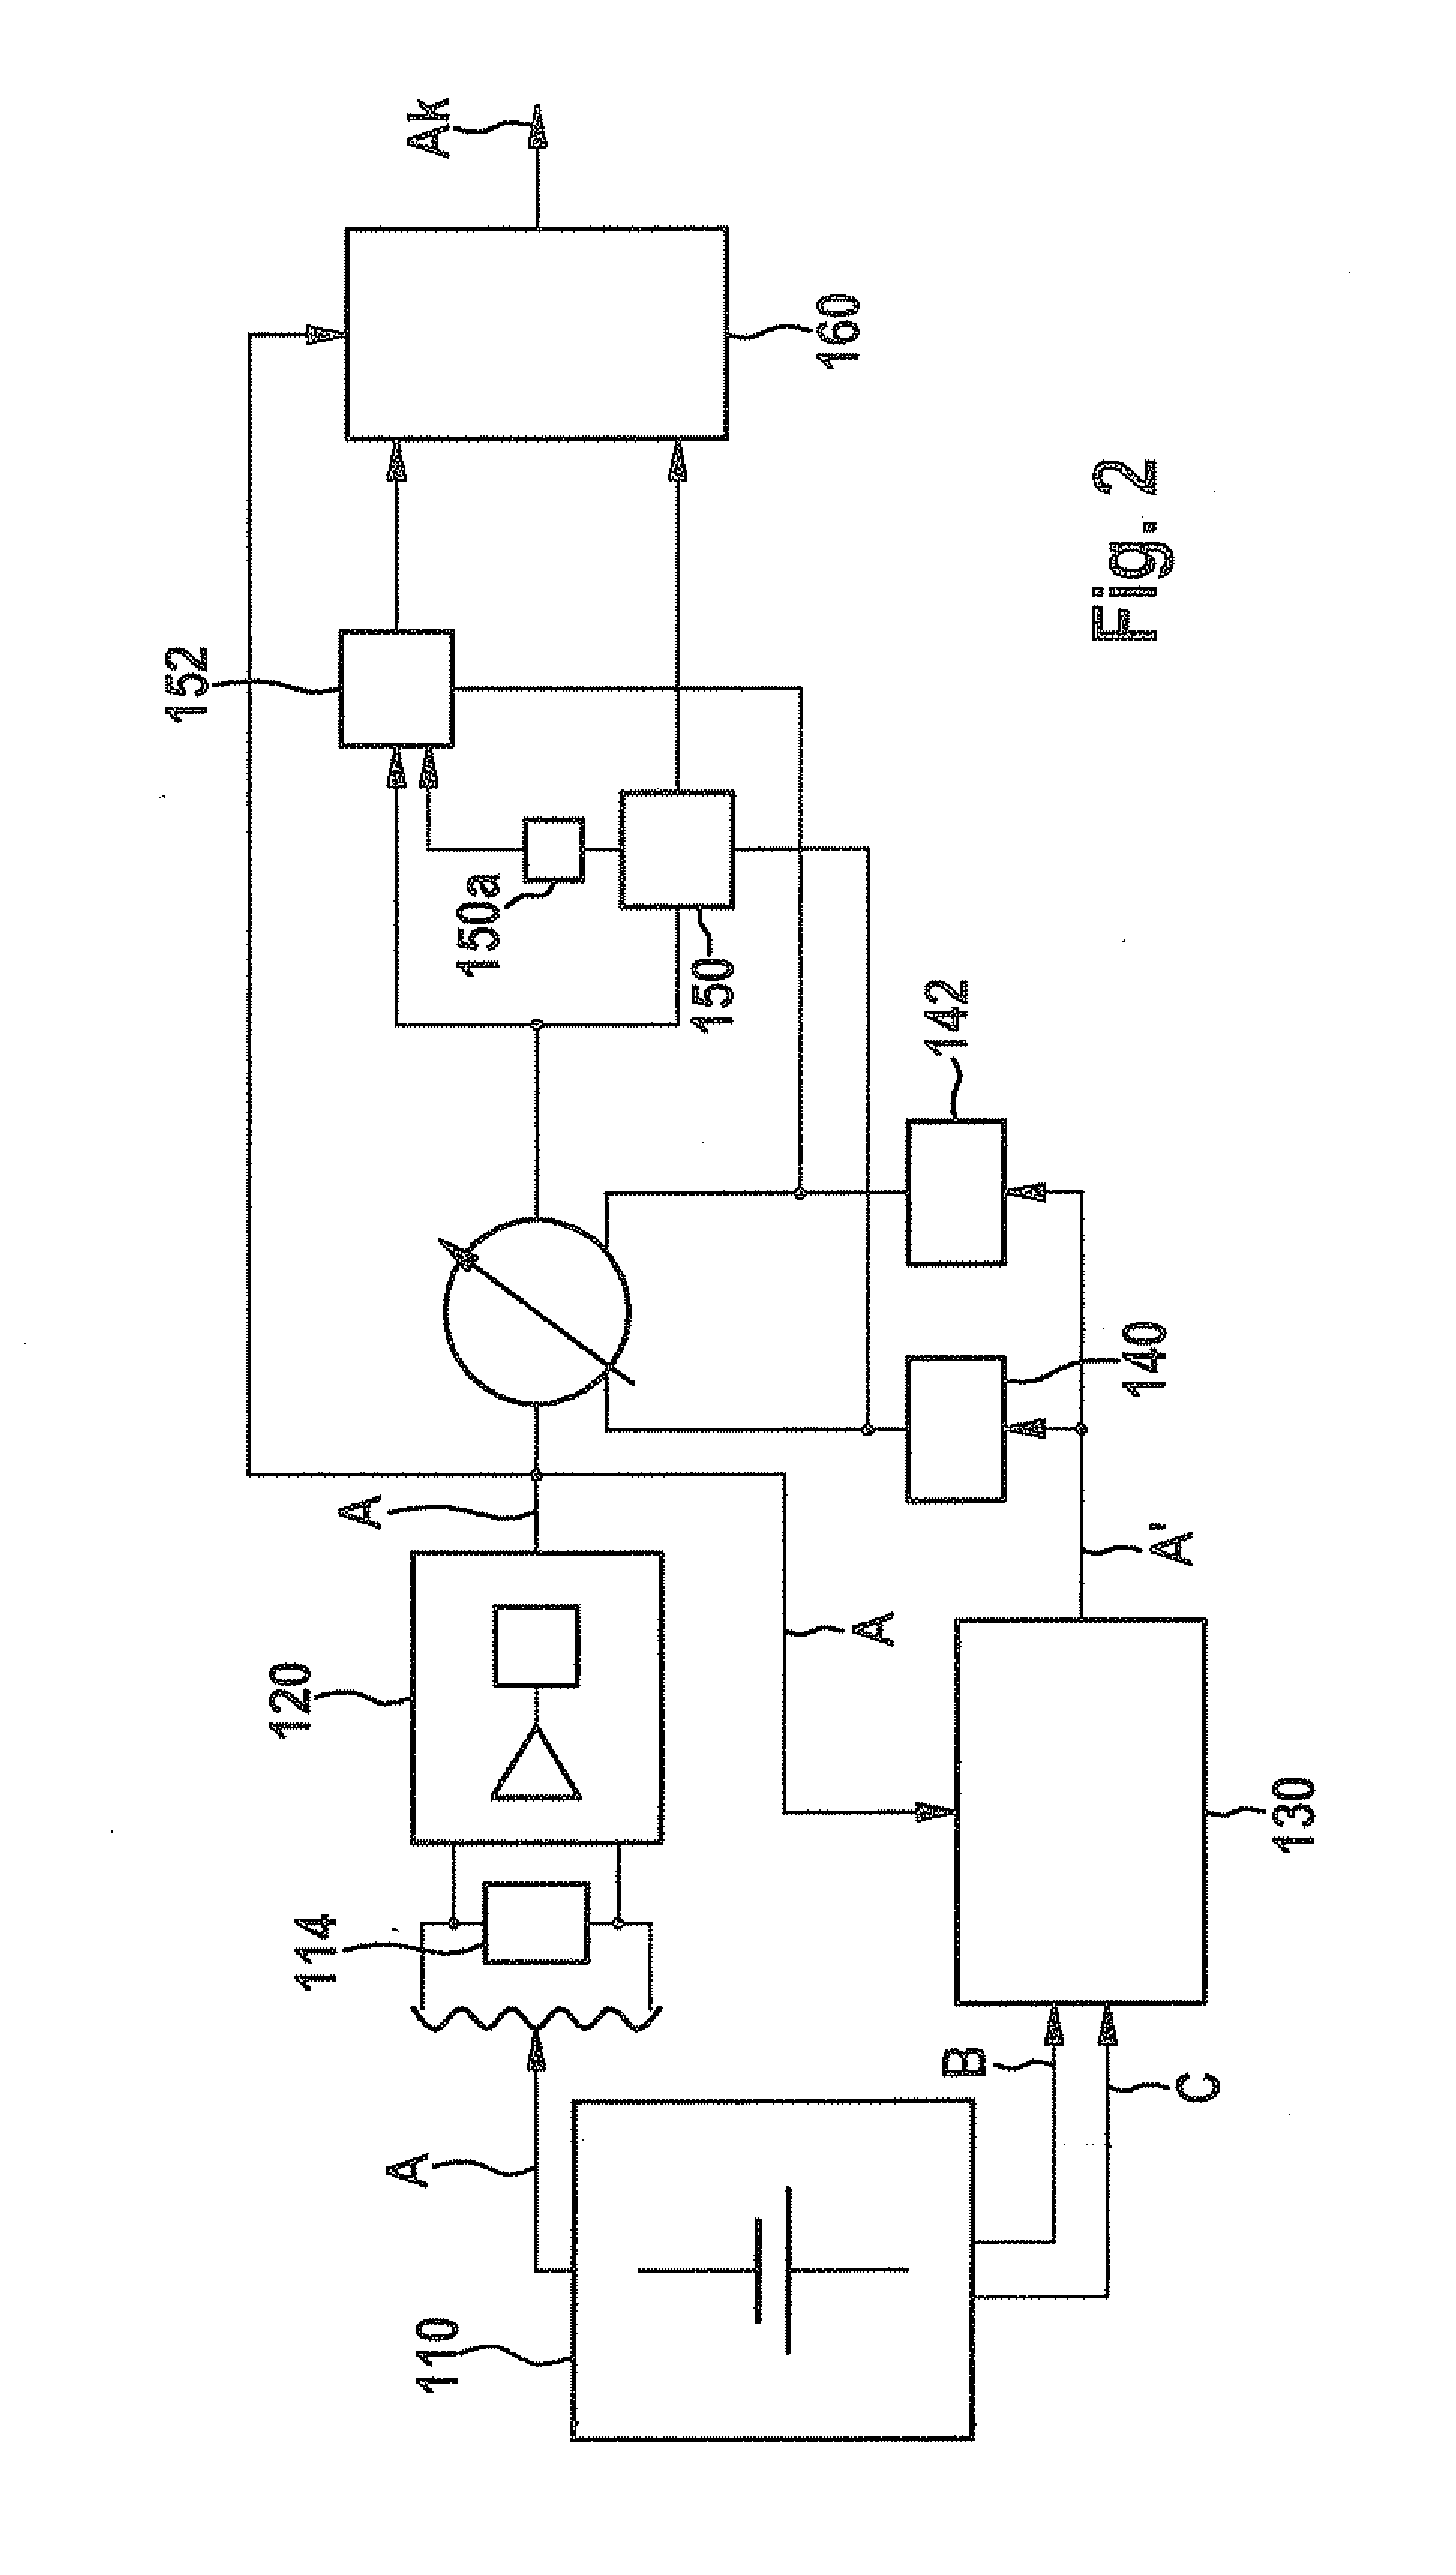 Method and device for error-compensated current measurement of an electrical accumulator